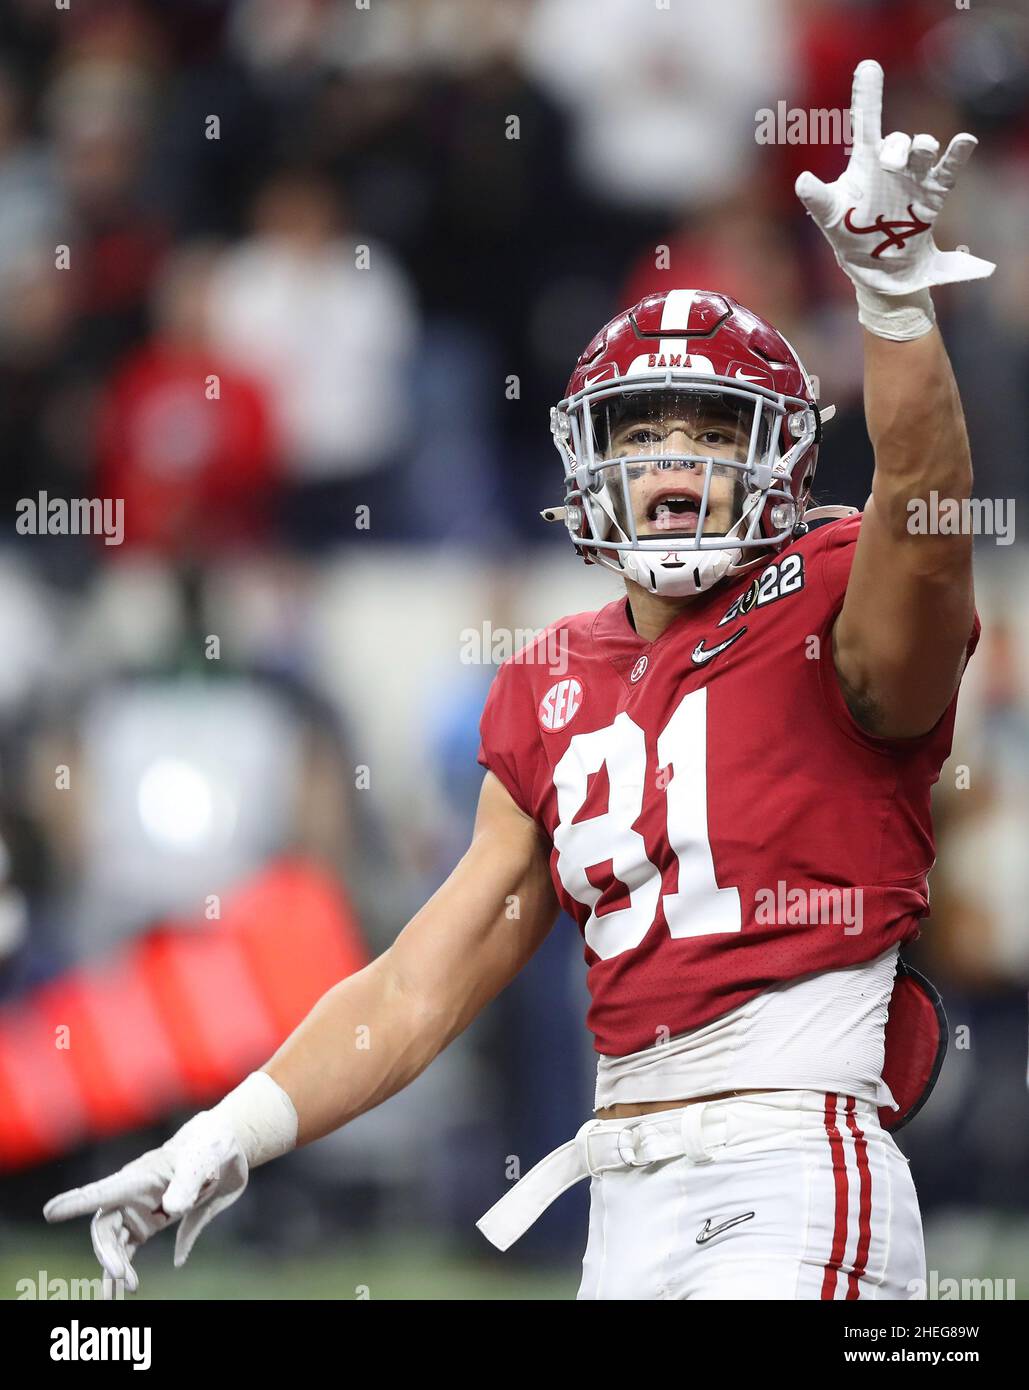 Indianapolis, United States. 10th Jan, 2022. Alabama Crimson Tide tight end Cameron Latu (81) celebrates a 3-yard touchdown against the Georgia Bulldogs during the second half of the 2022 NCAA National Championship football game at Lucas Oil Stadium in Indianapolis, Indiana, on Mond Credit: UPI/Alamy Live News Stock Photo